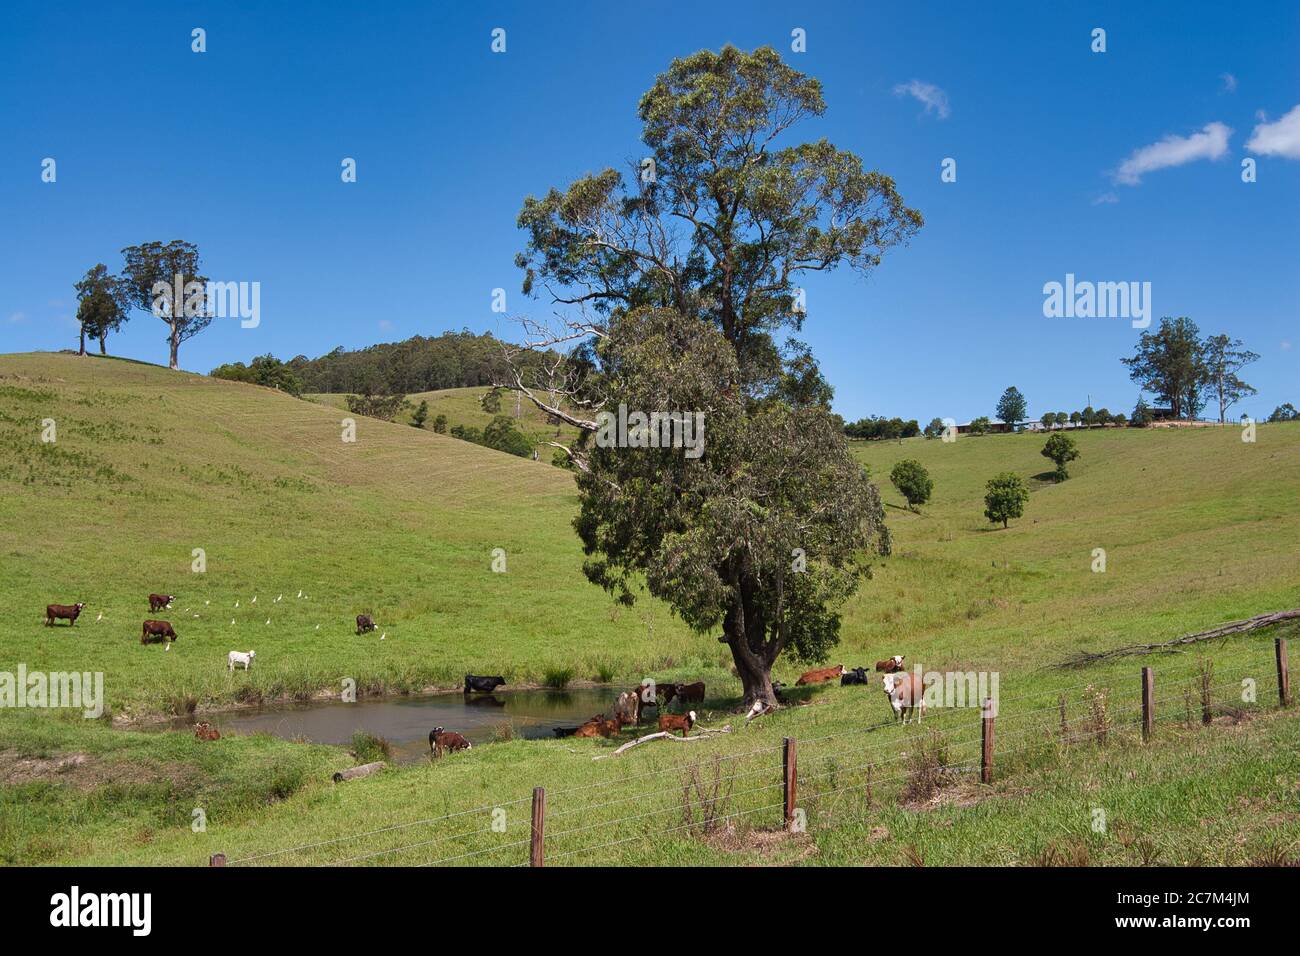 Typical farmland in the countryside with cows around a watering hole, near Macksville, mid eastern New South Wales, Australia. Stock Photo